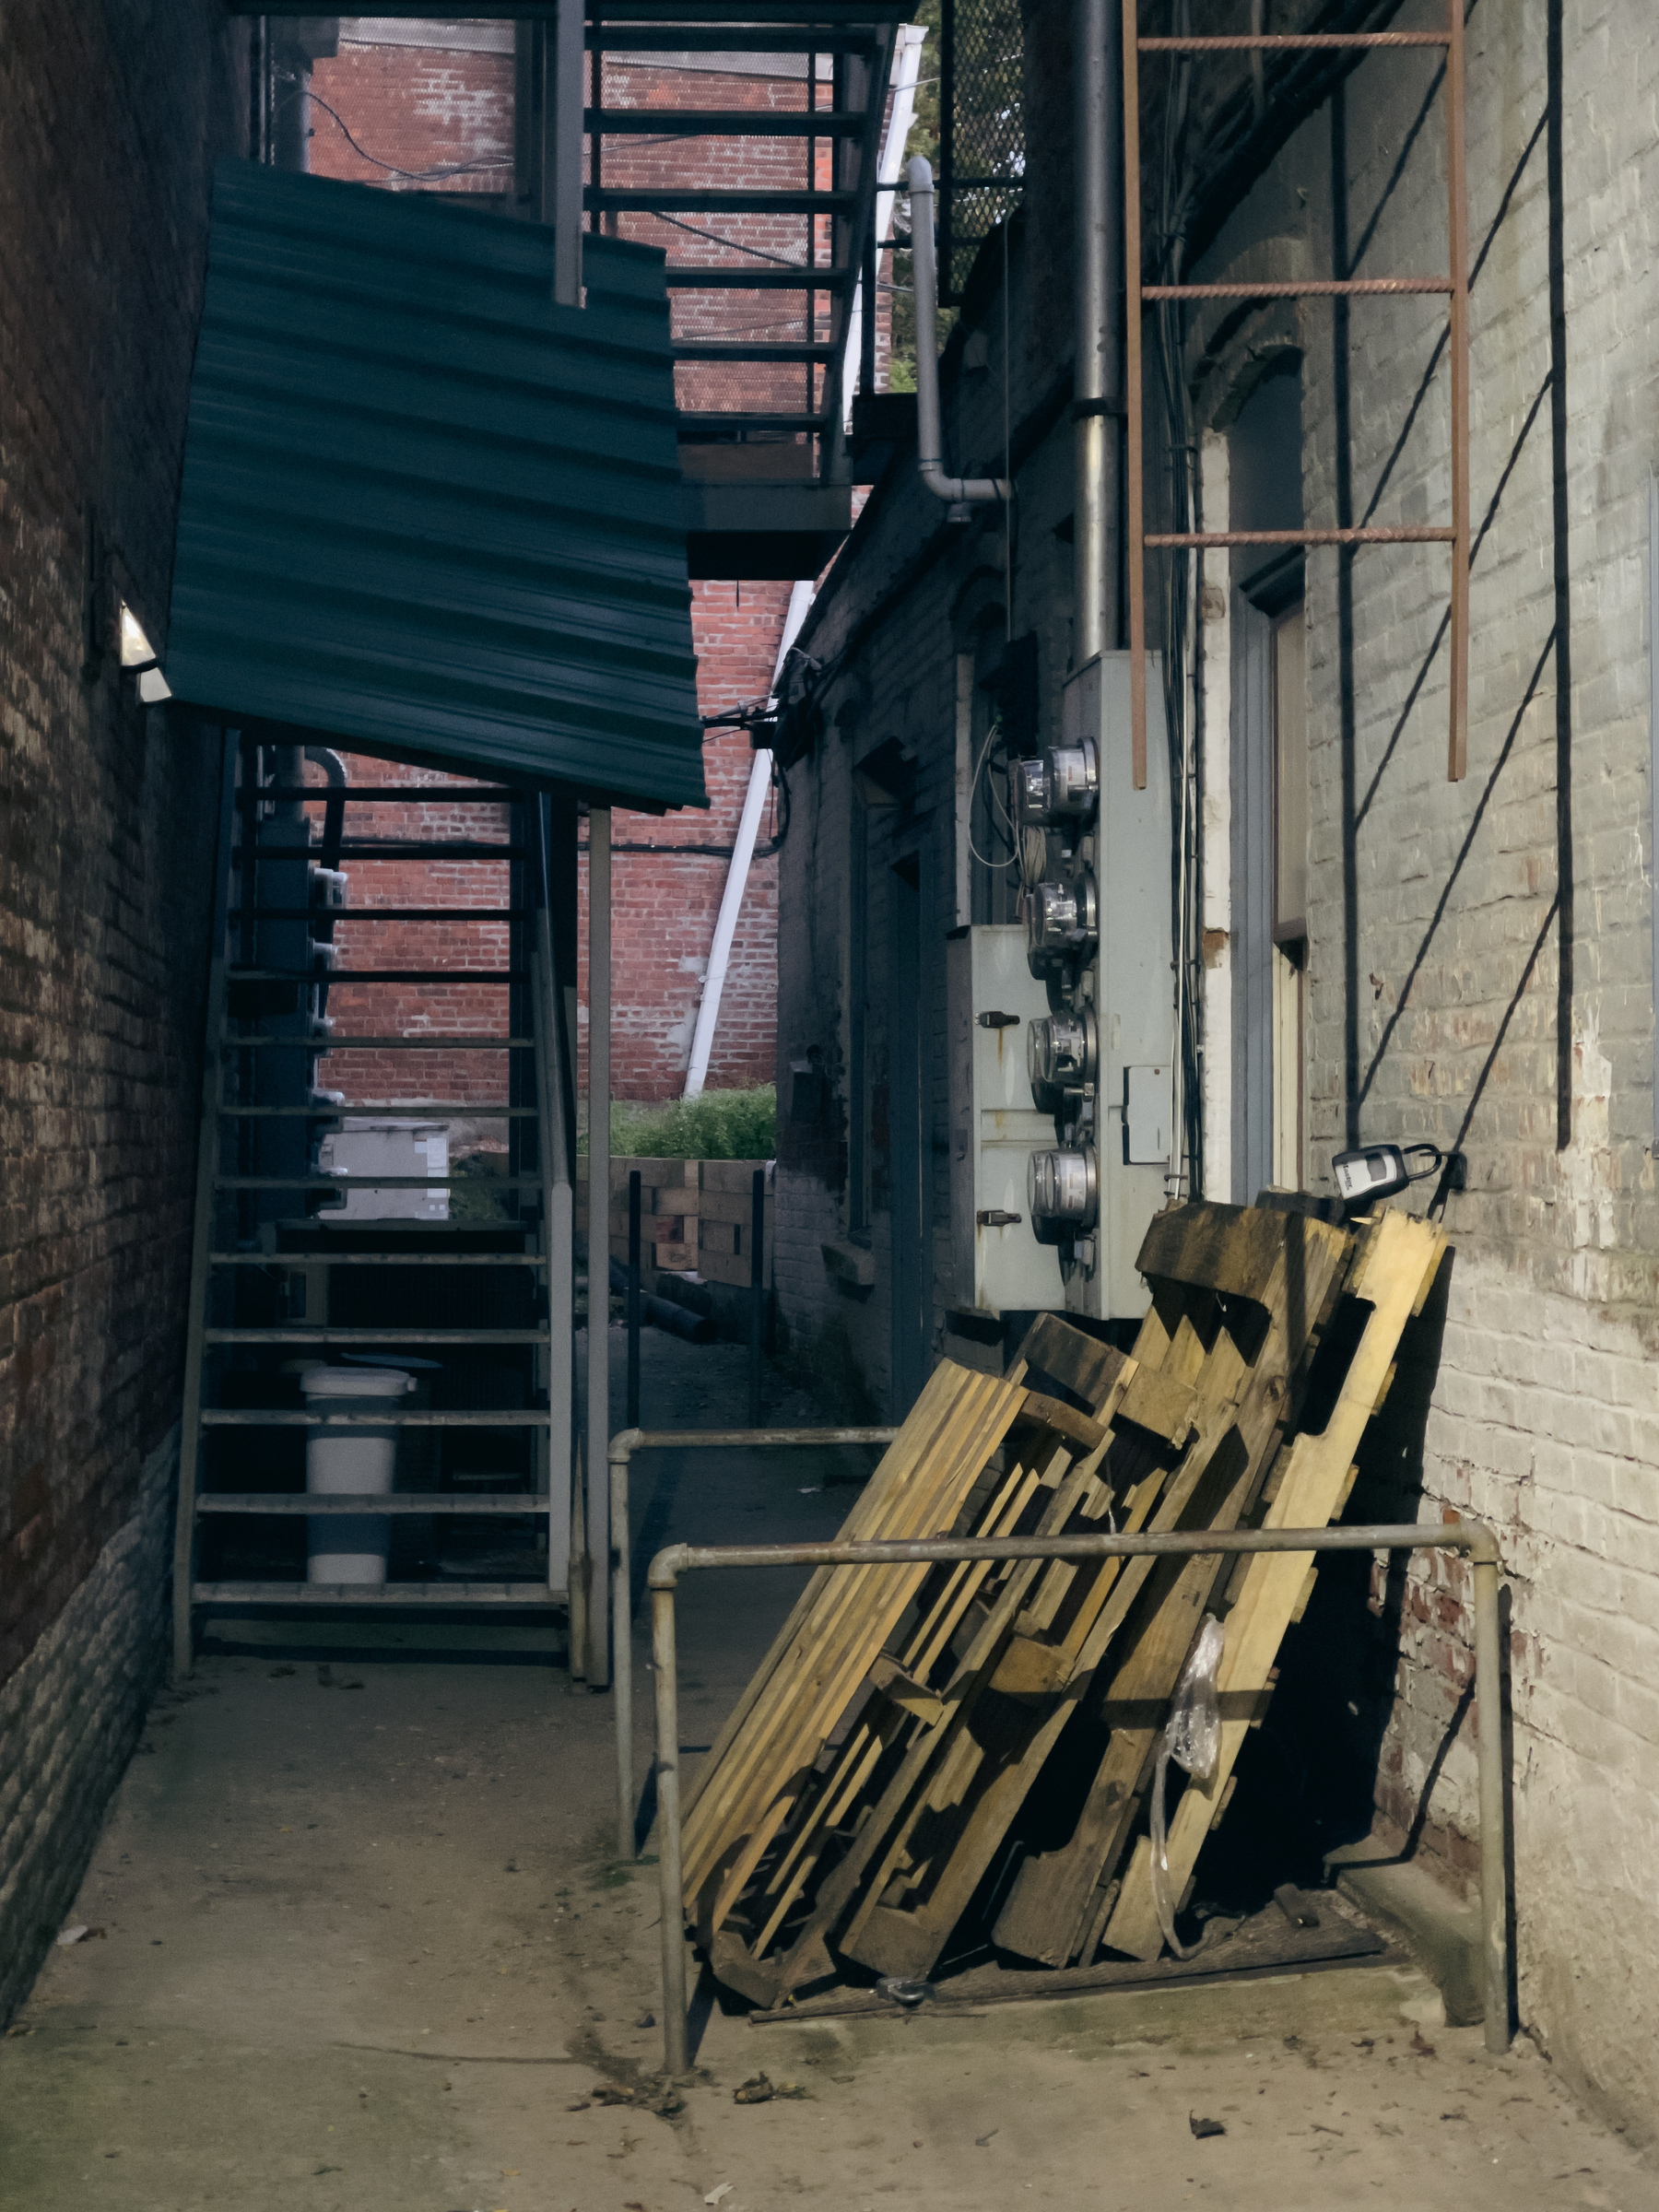 Alley between buildings wit fire escapes and wooden pallets.